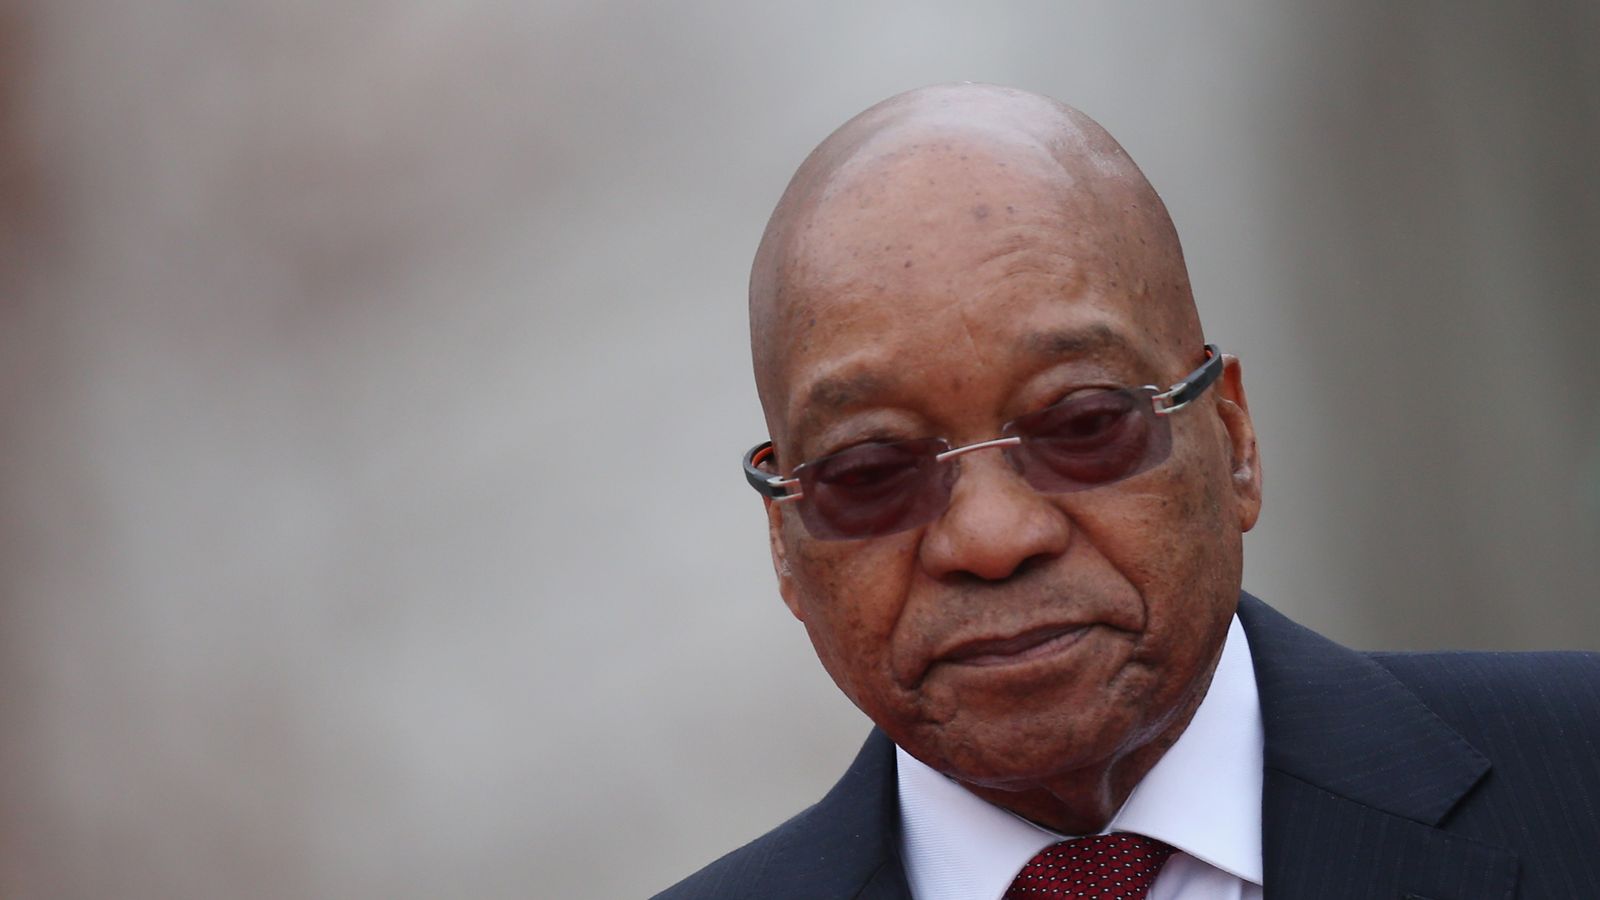 South African ministers call on president Jacob Zuma to 